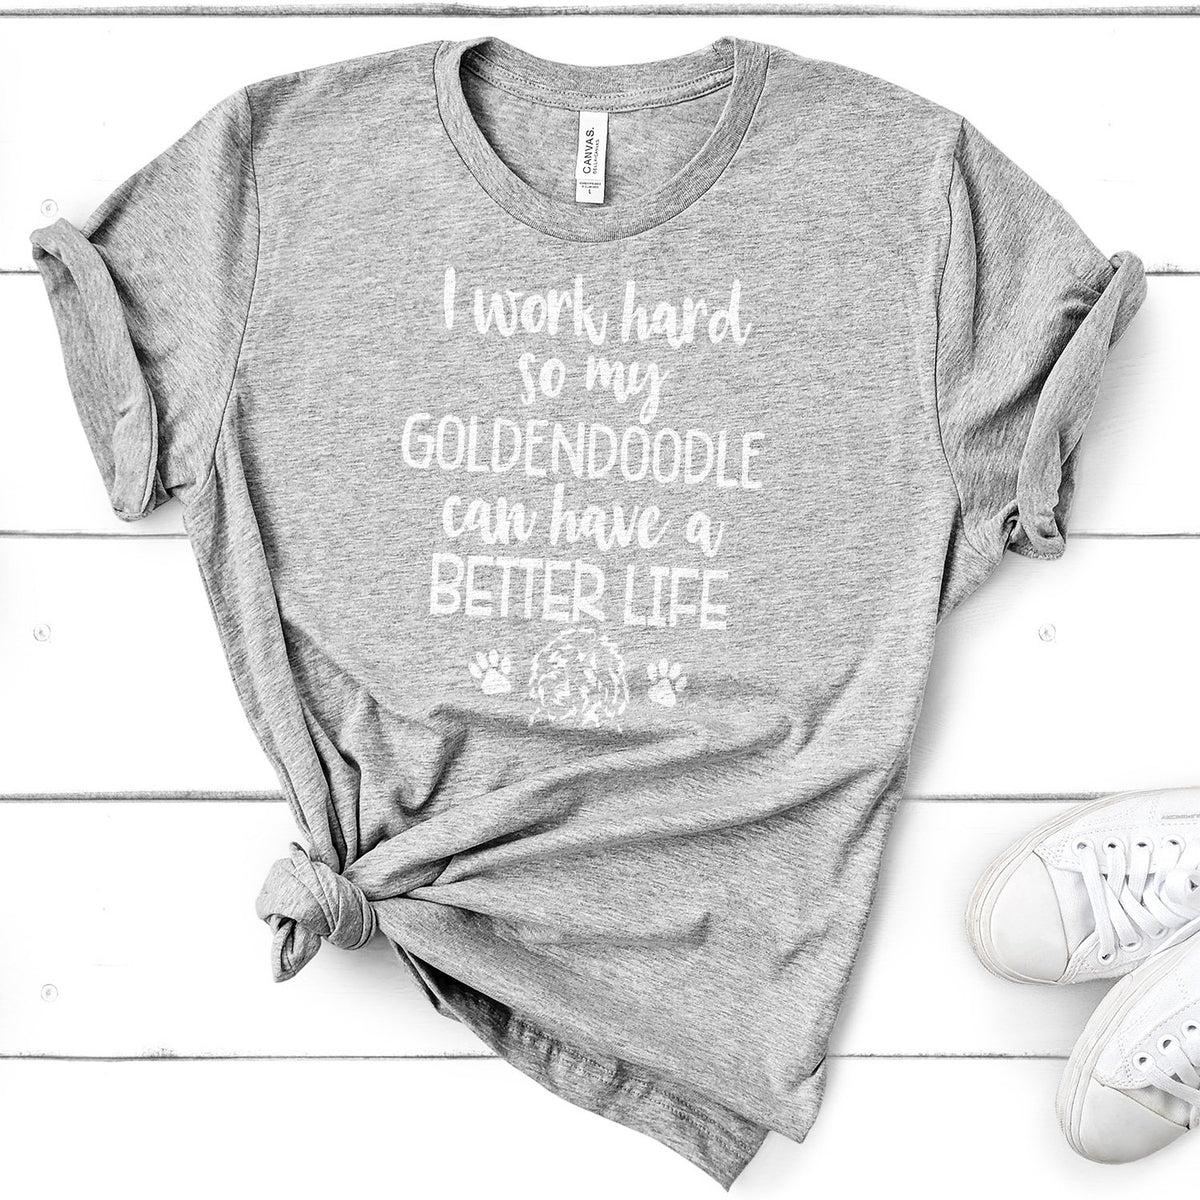 I Work Hard So My Goldendoodle Can Have A Better Life - Short Sleeve Tee Shirt